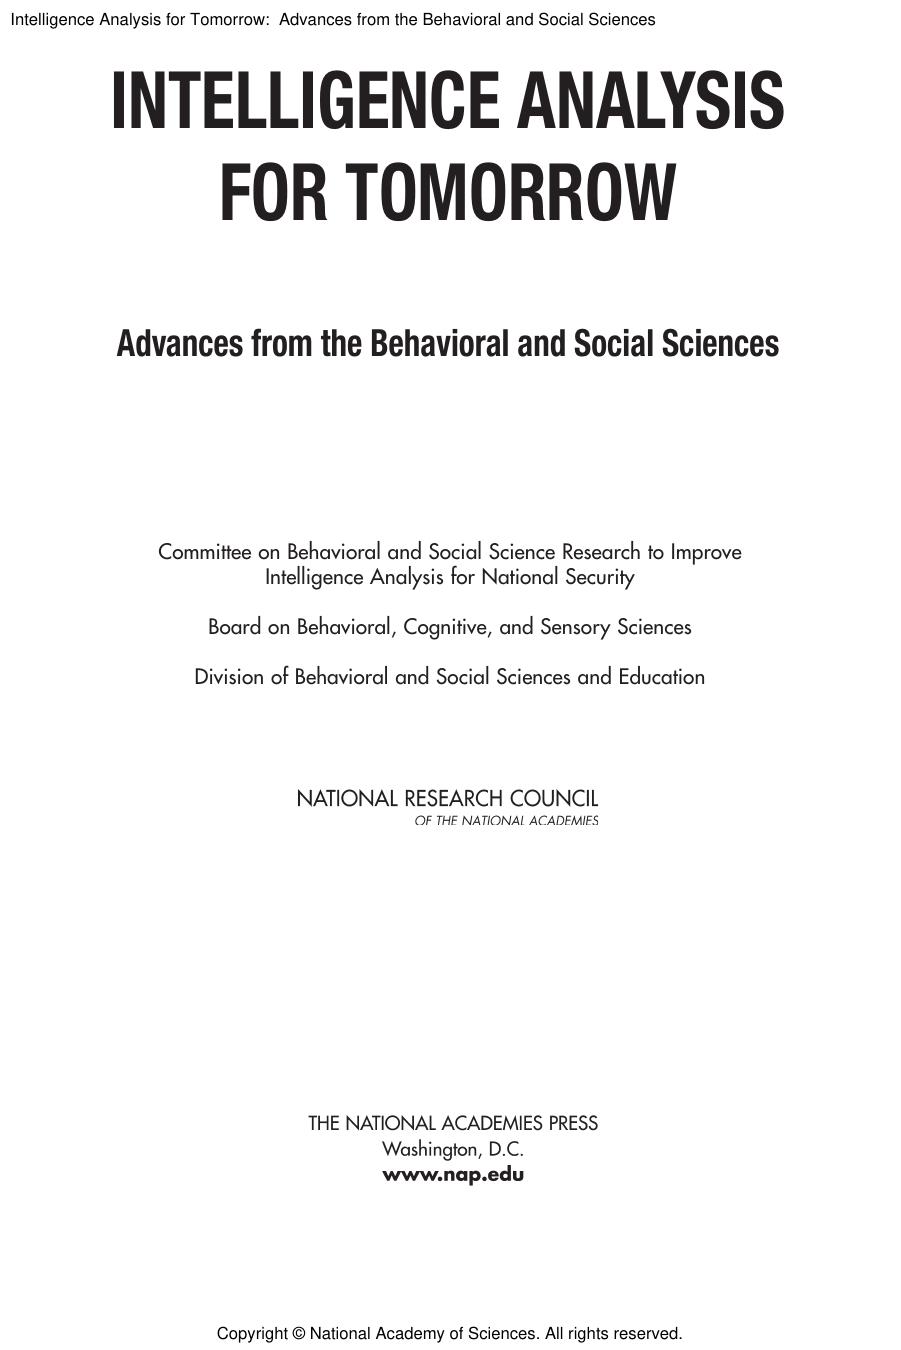 Intelligence Analysis for Tomorrow  Advances from the Behavioral and Social Sciences ( PDFDrive.com )